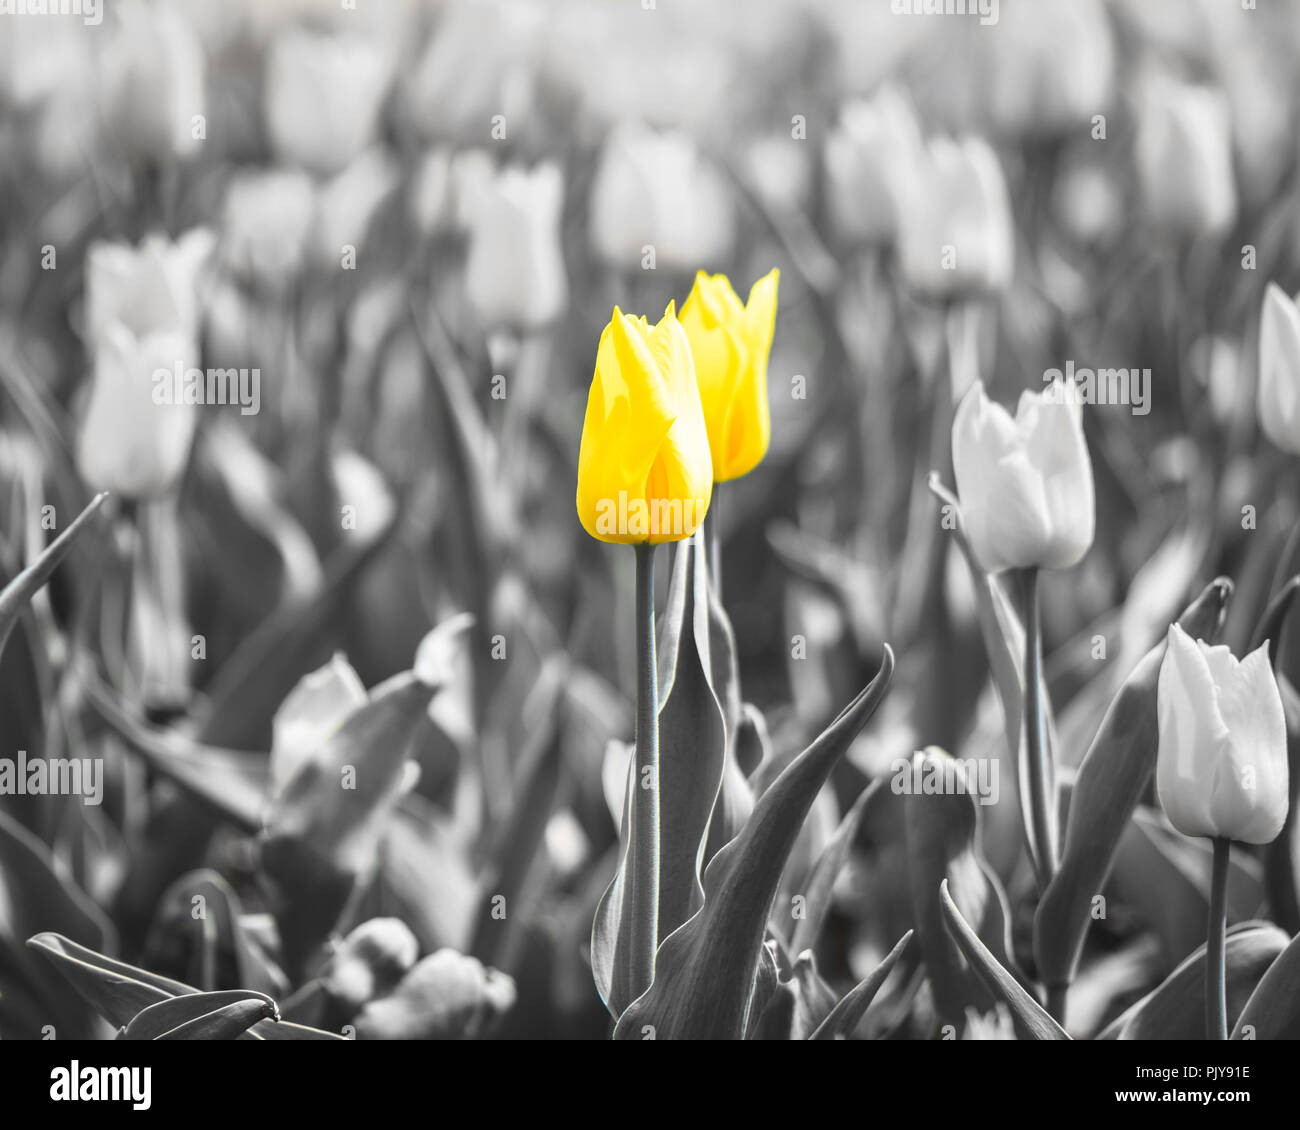 Closeup Of Some Yellow Tulips With One Bulb Highlighted And The Rest In Black And White Stock Photo